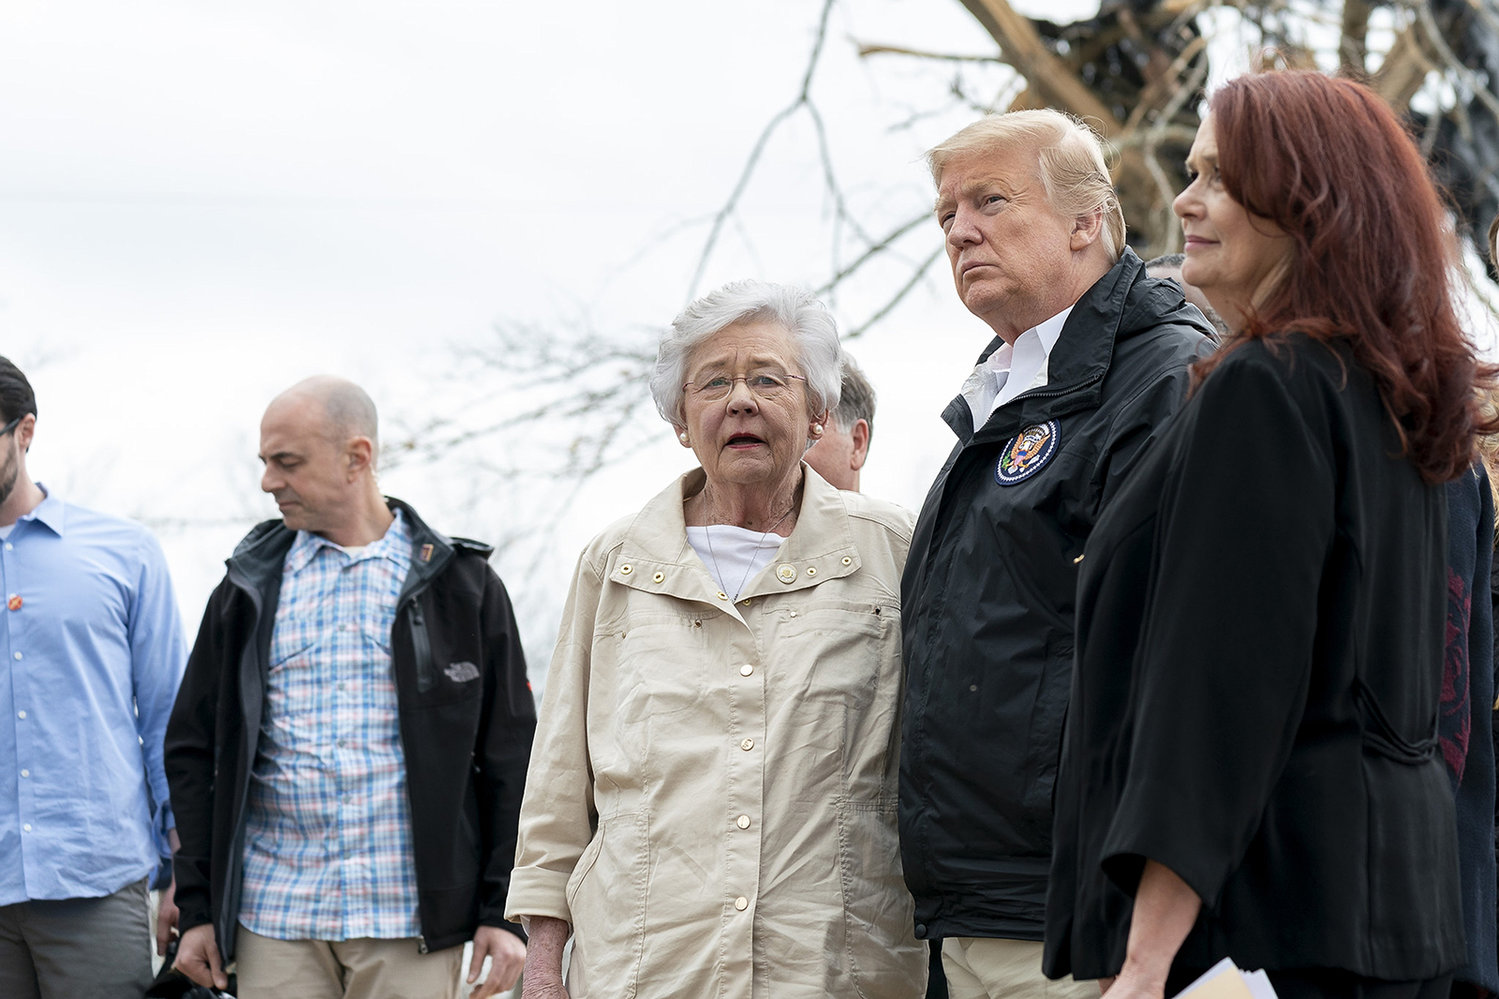 Then U.S. President Donald Trump surveyed storm damage and met with residents along with Alabama Gov. Kay Ivey, center, March 8, 2019 in Opelika, Alabama. Trump is the leading candidate for GOP presidential nomination, according to a CPAC poll taken Saturday, Aug. 6, 2022. (Shealah Craighead/White House via ZUMA Wire/TNS)